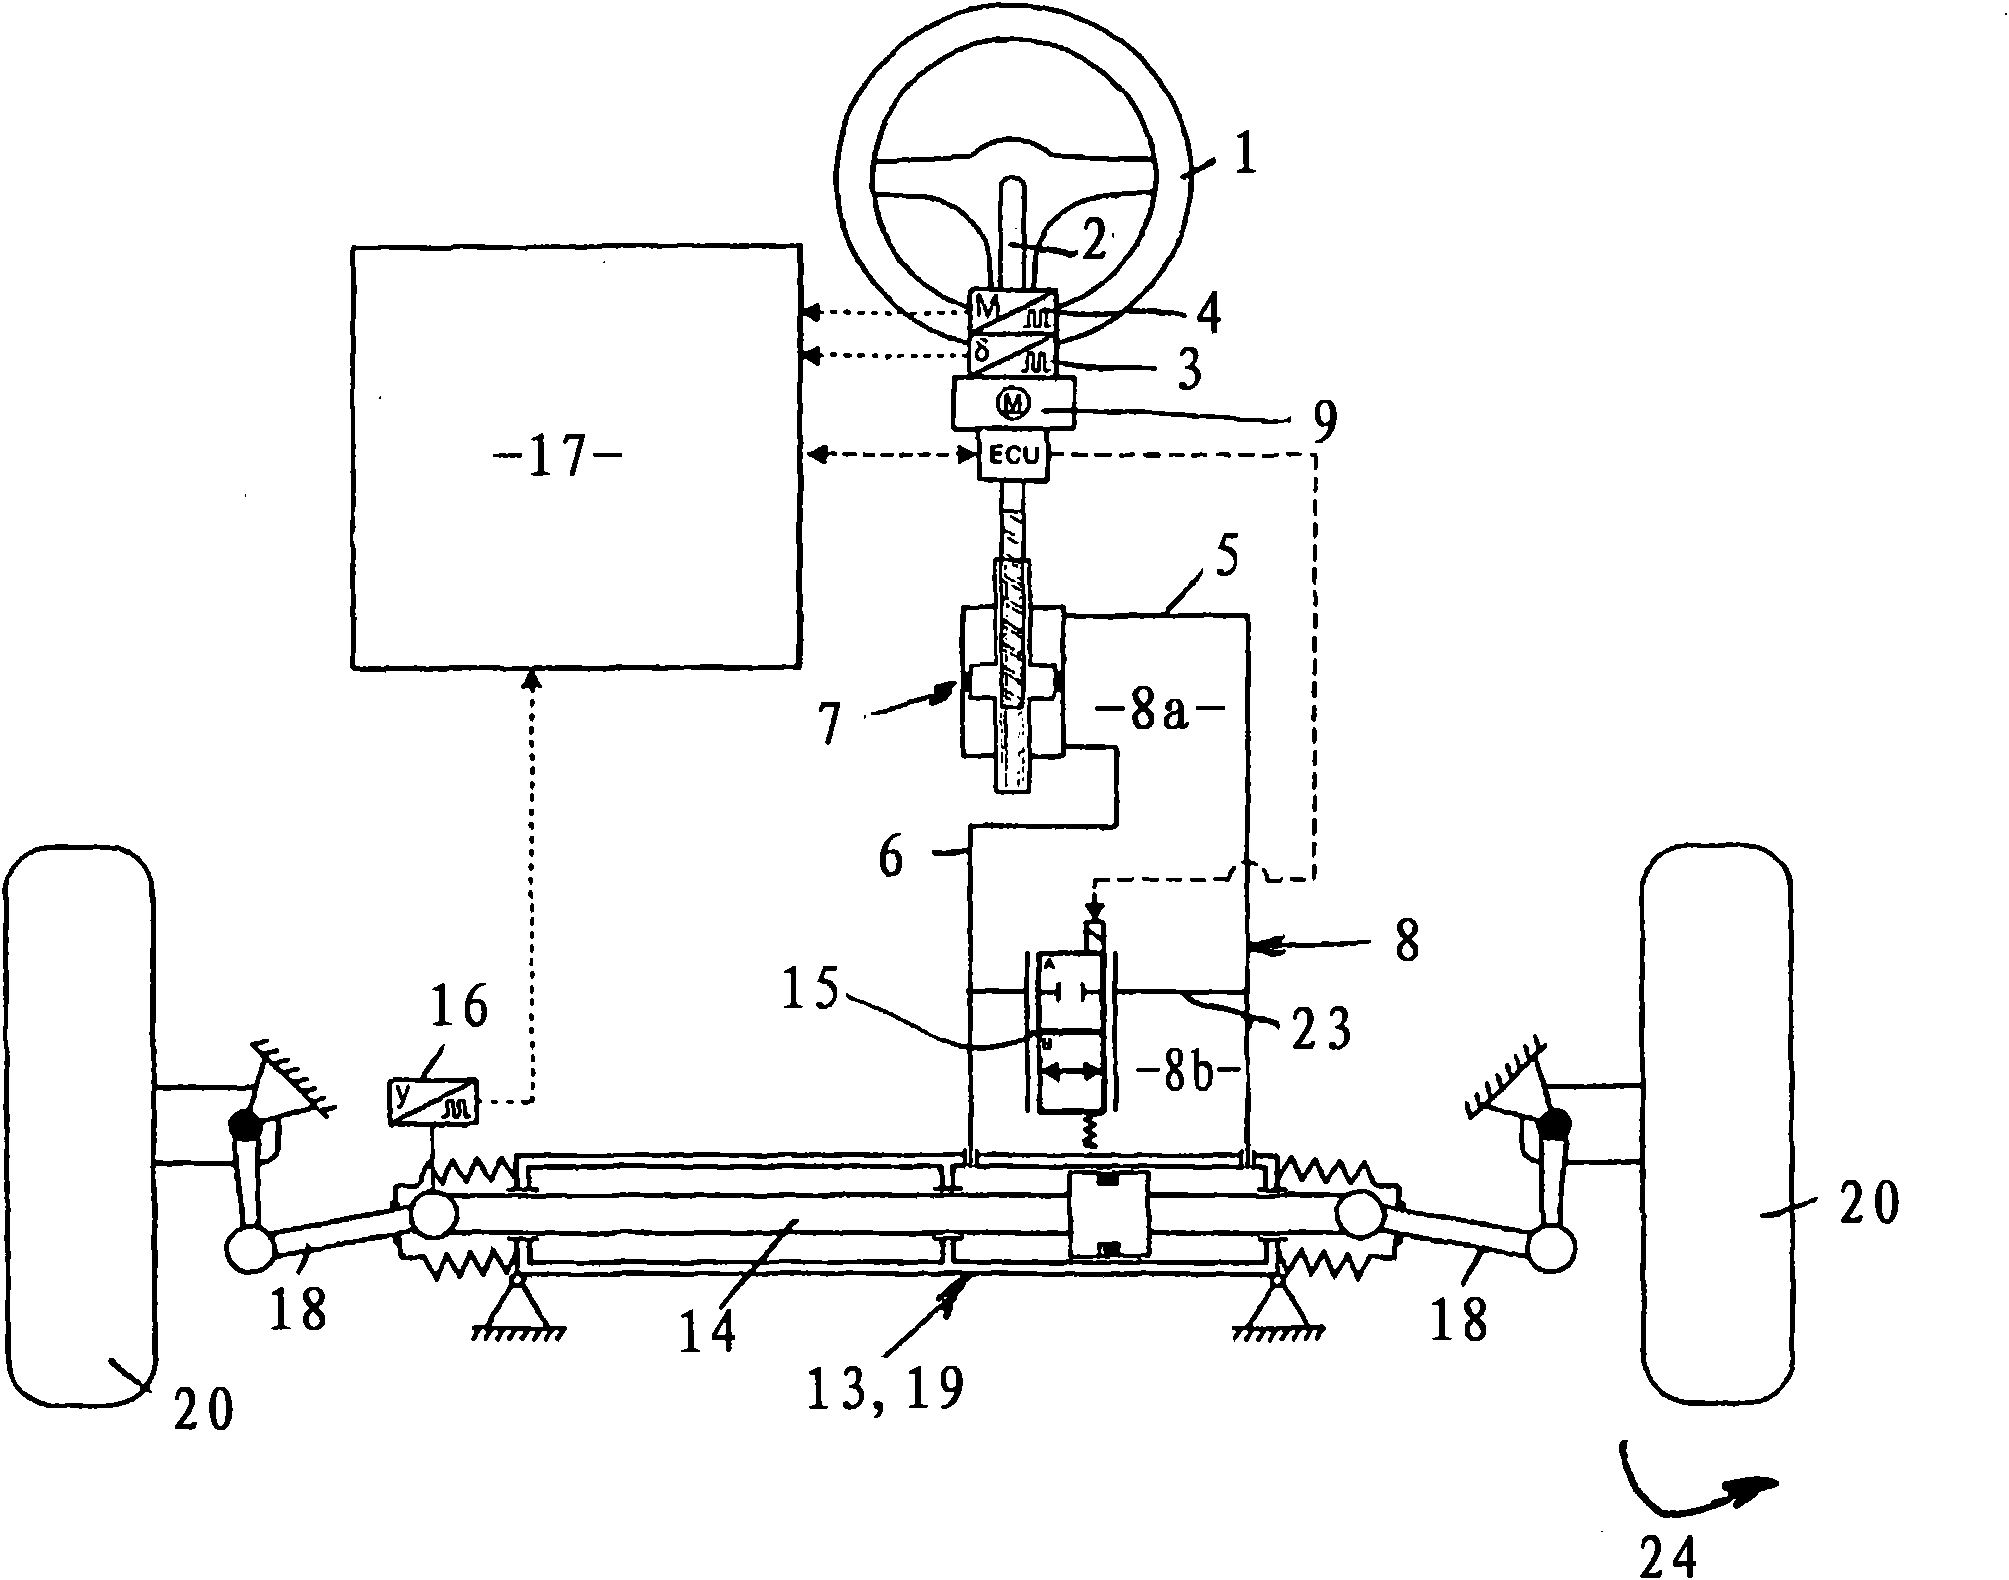 Vehicle steering system of the by-wire design type